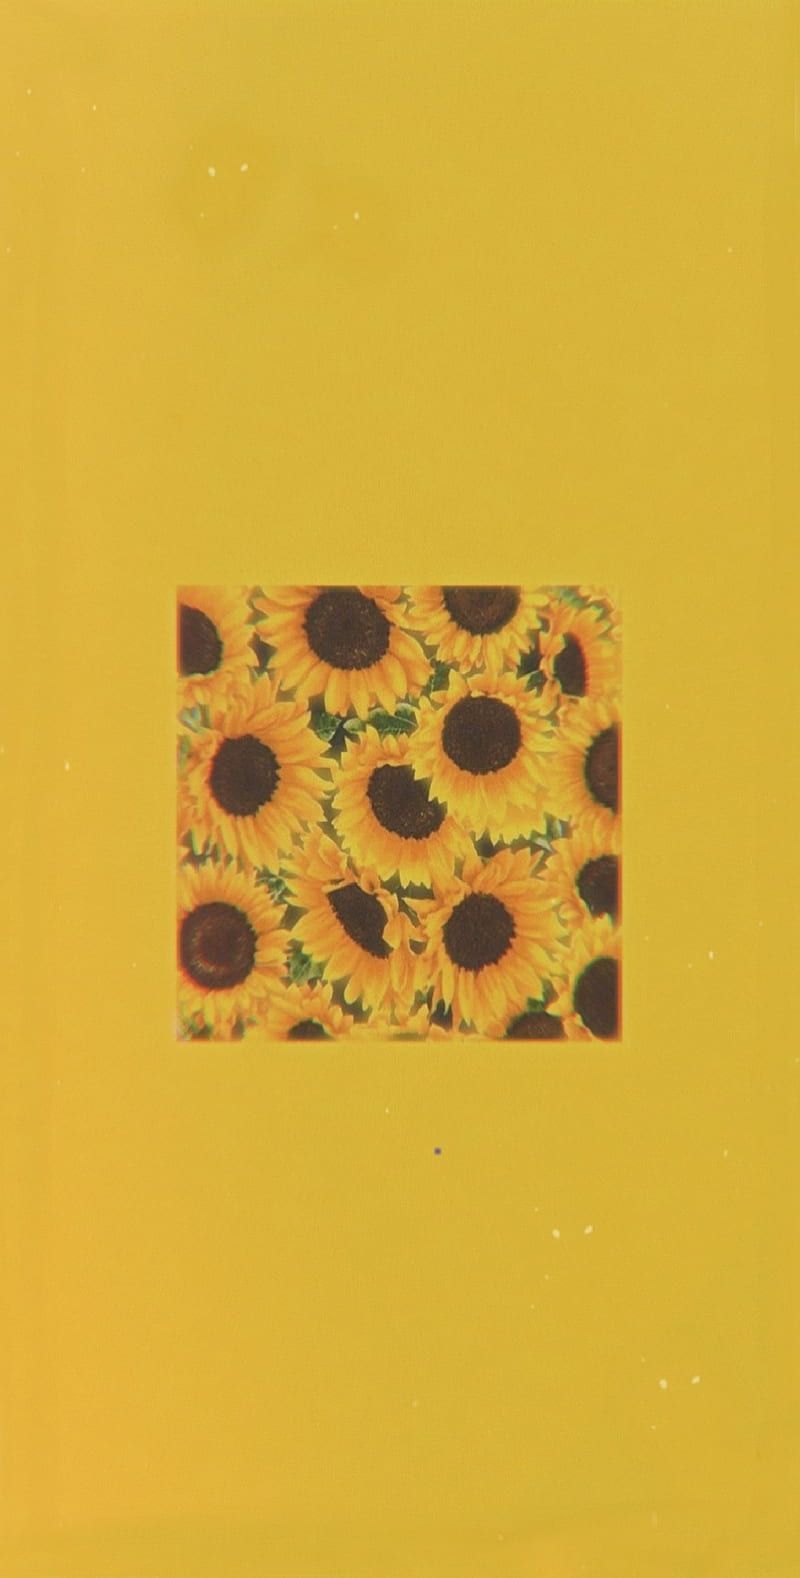 A yellow background with sunflowers on it - Pastel yellow